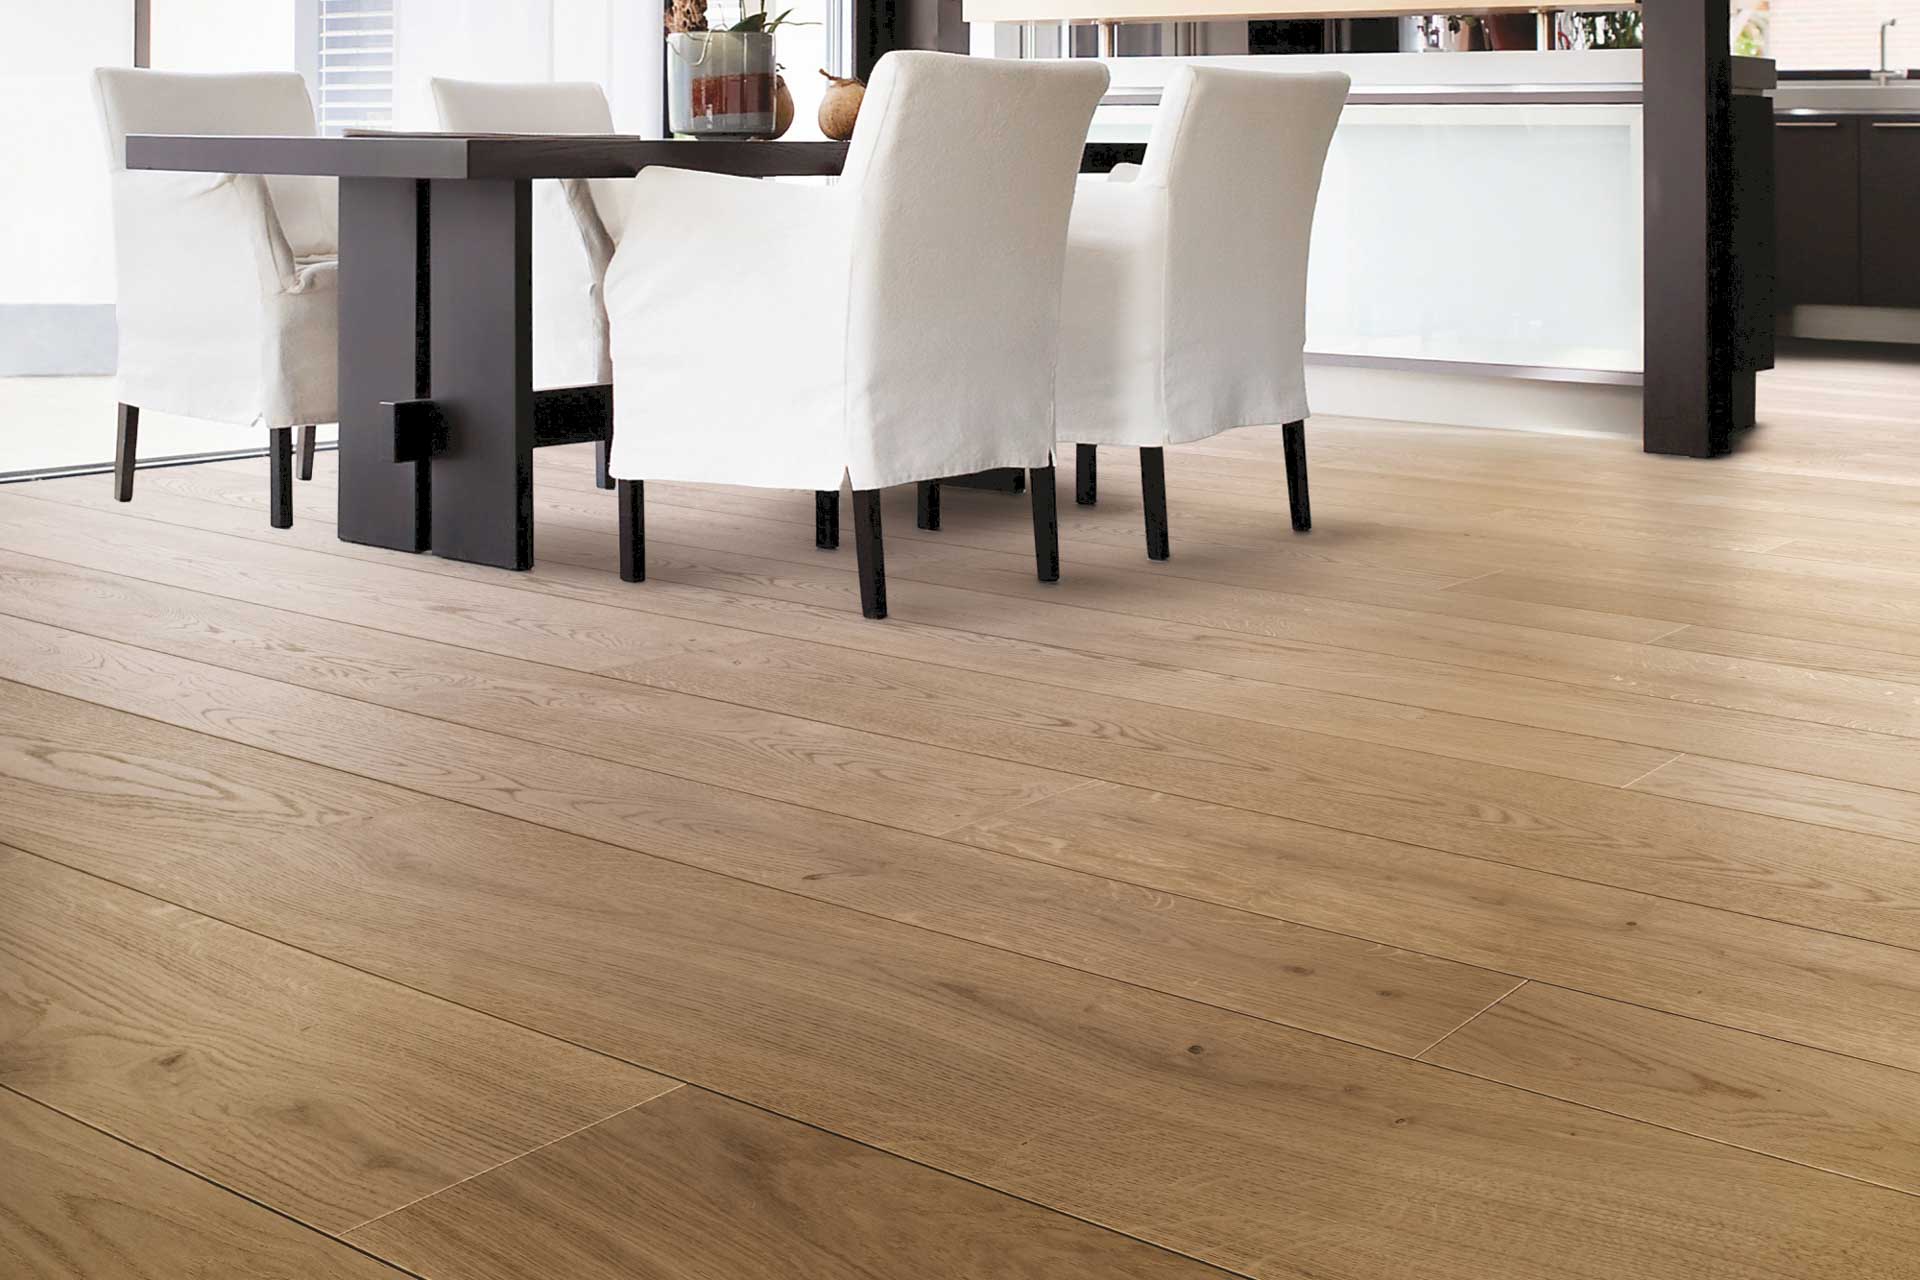 Best Flooring Options And Types For Your Home Images